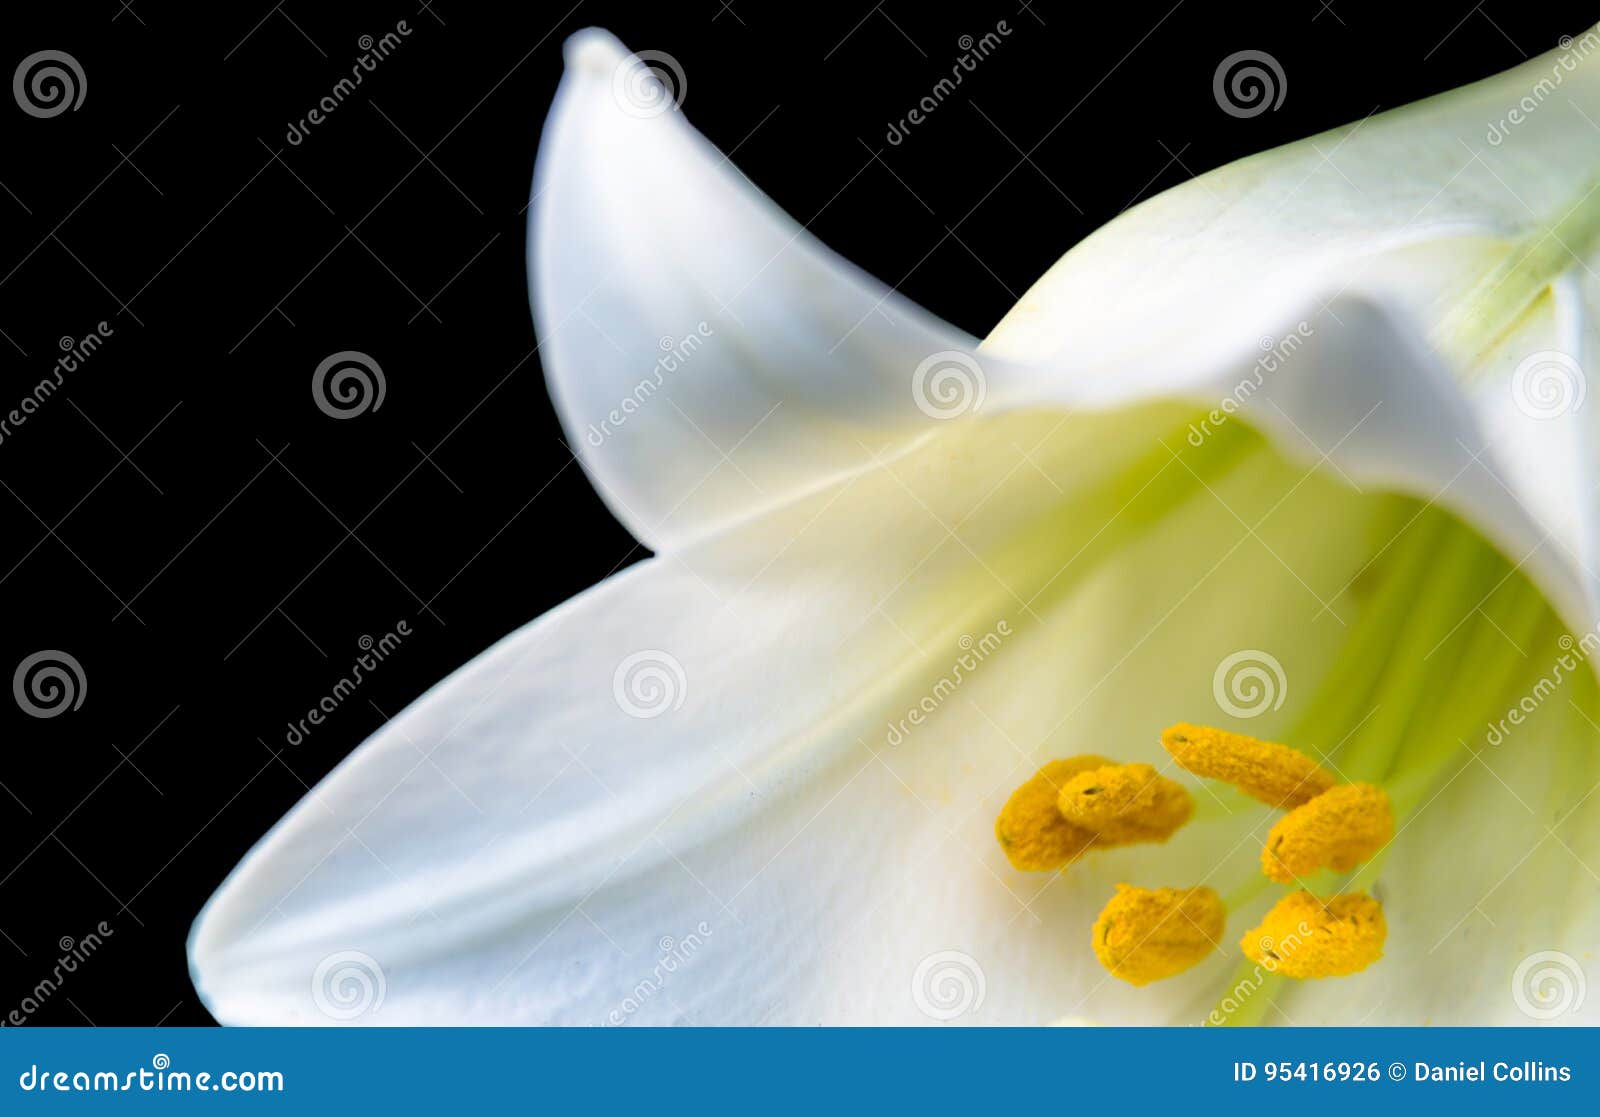 white lily on a black background